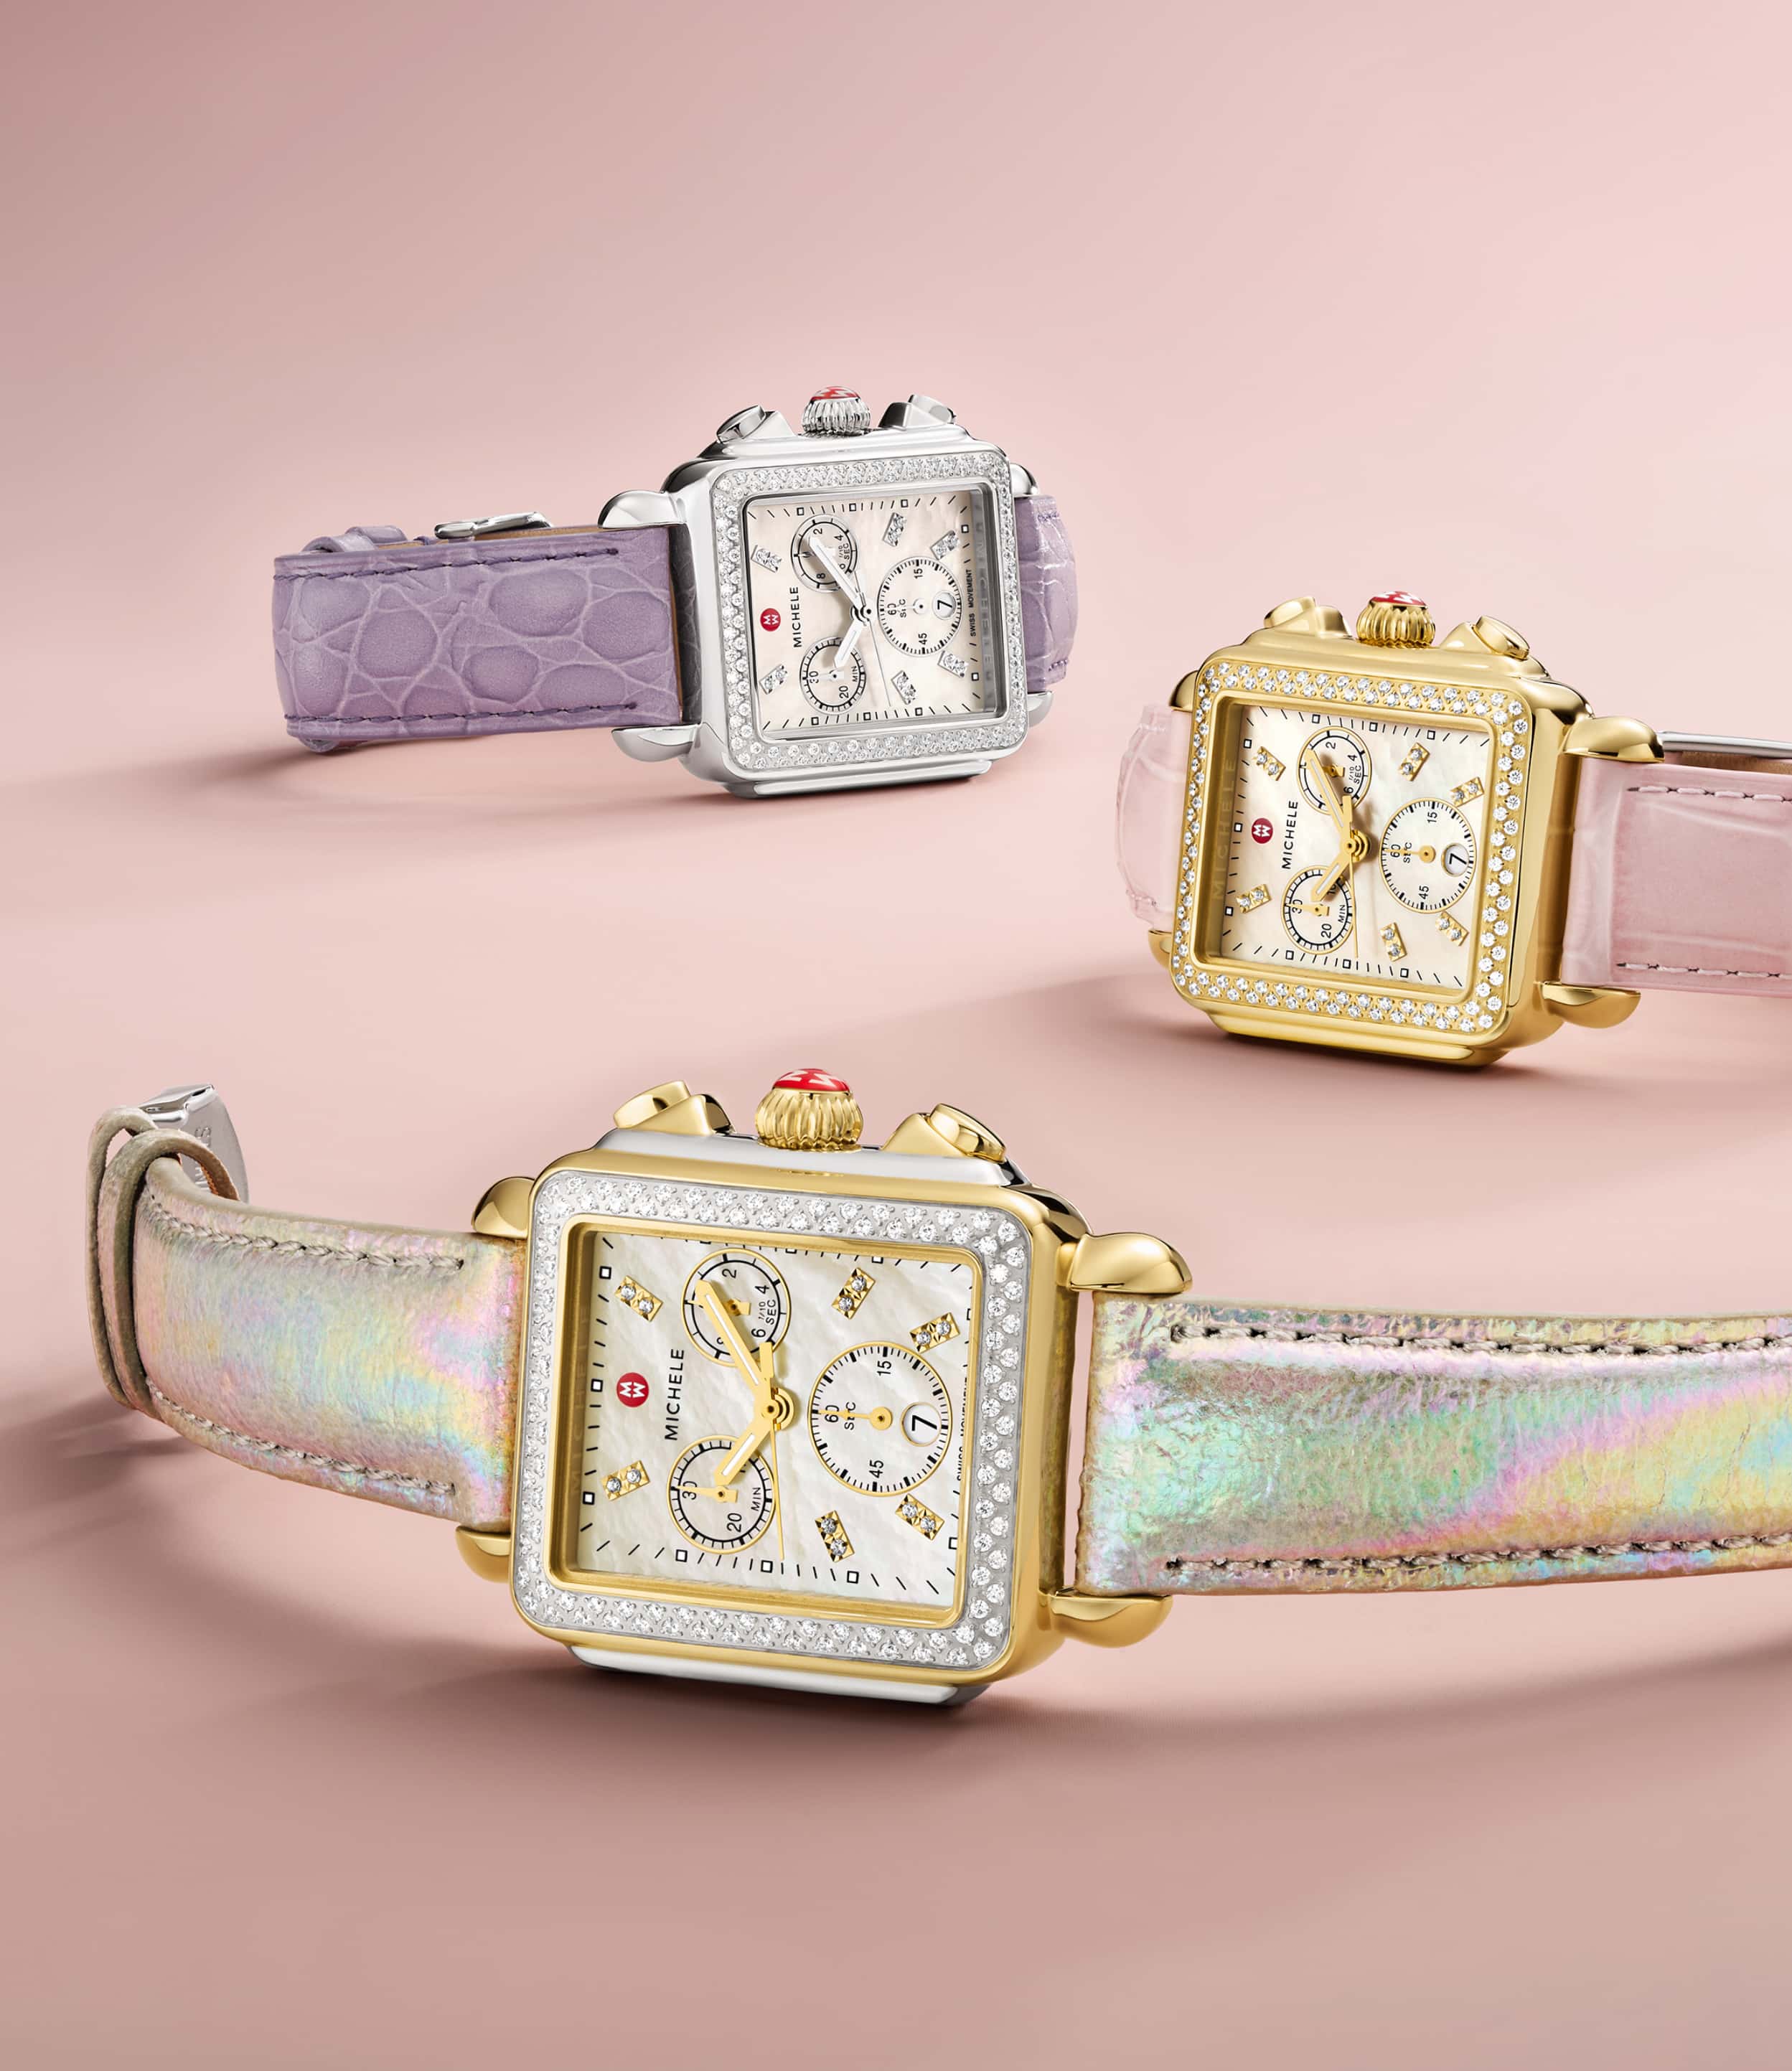 three MICHELE watches featuring colorful interchangeable straps